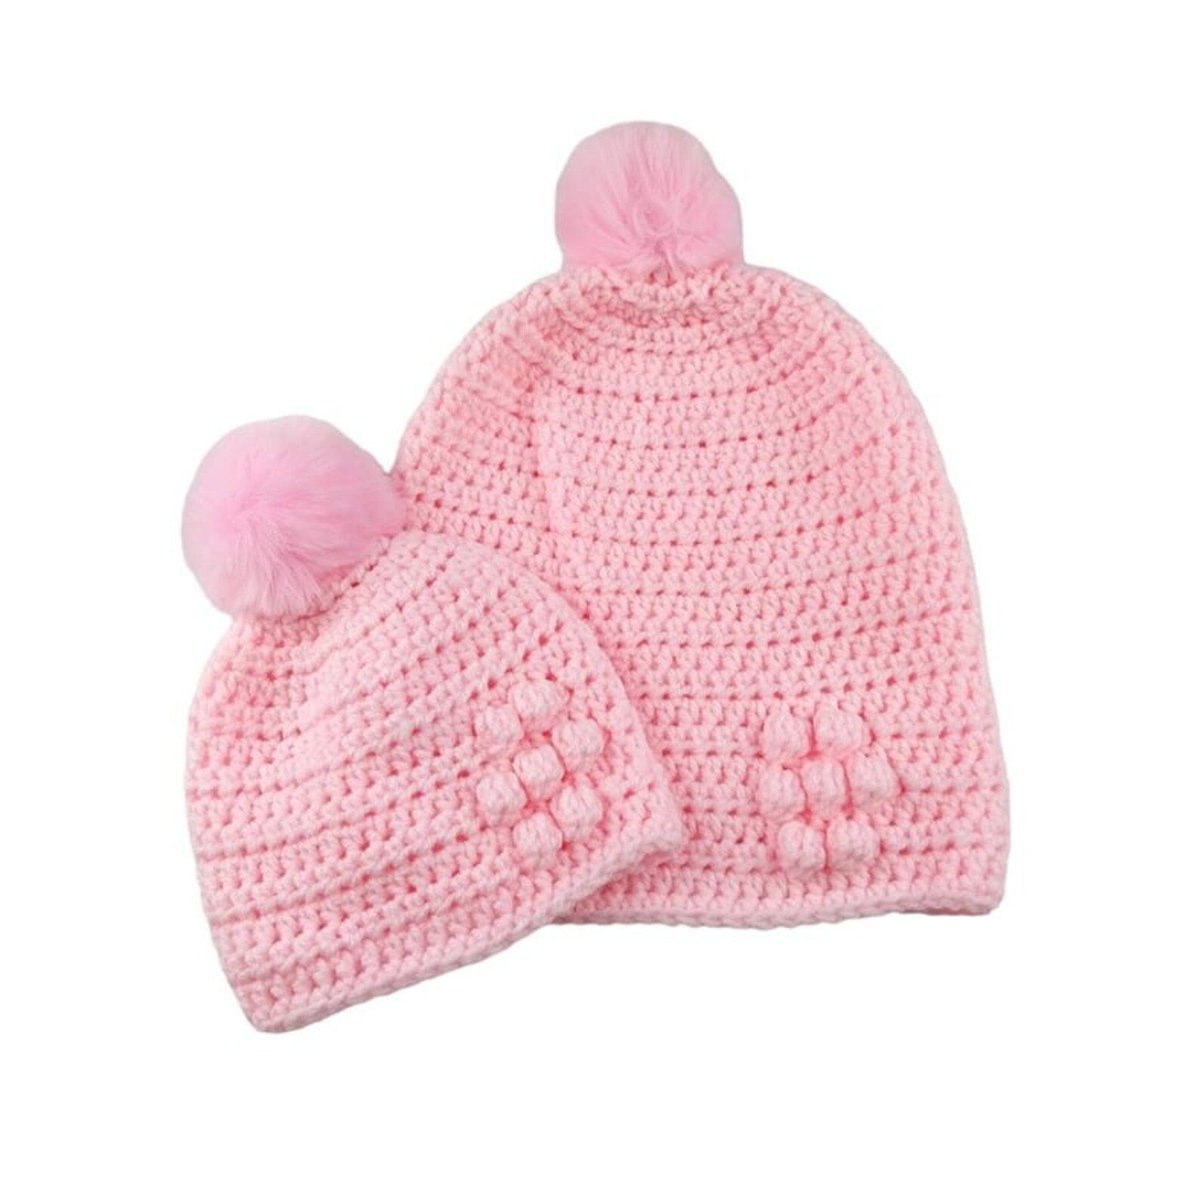 Stay warm and stylish with these matching mummy and baby light pink crocheted hats. Featuring a cute flower detail and detachable faux fur pompoms. Shop now on #Etsy knittingtopia.etsy.com/listing/168535… #Handmade #MummyAndBaby #knittingtopia #craftbizparty #MHHSBD #shopindy #tweetuk